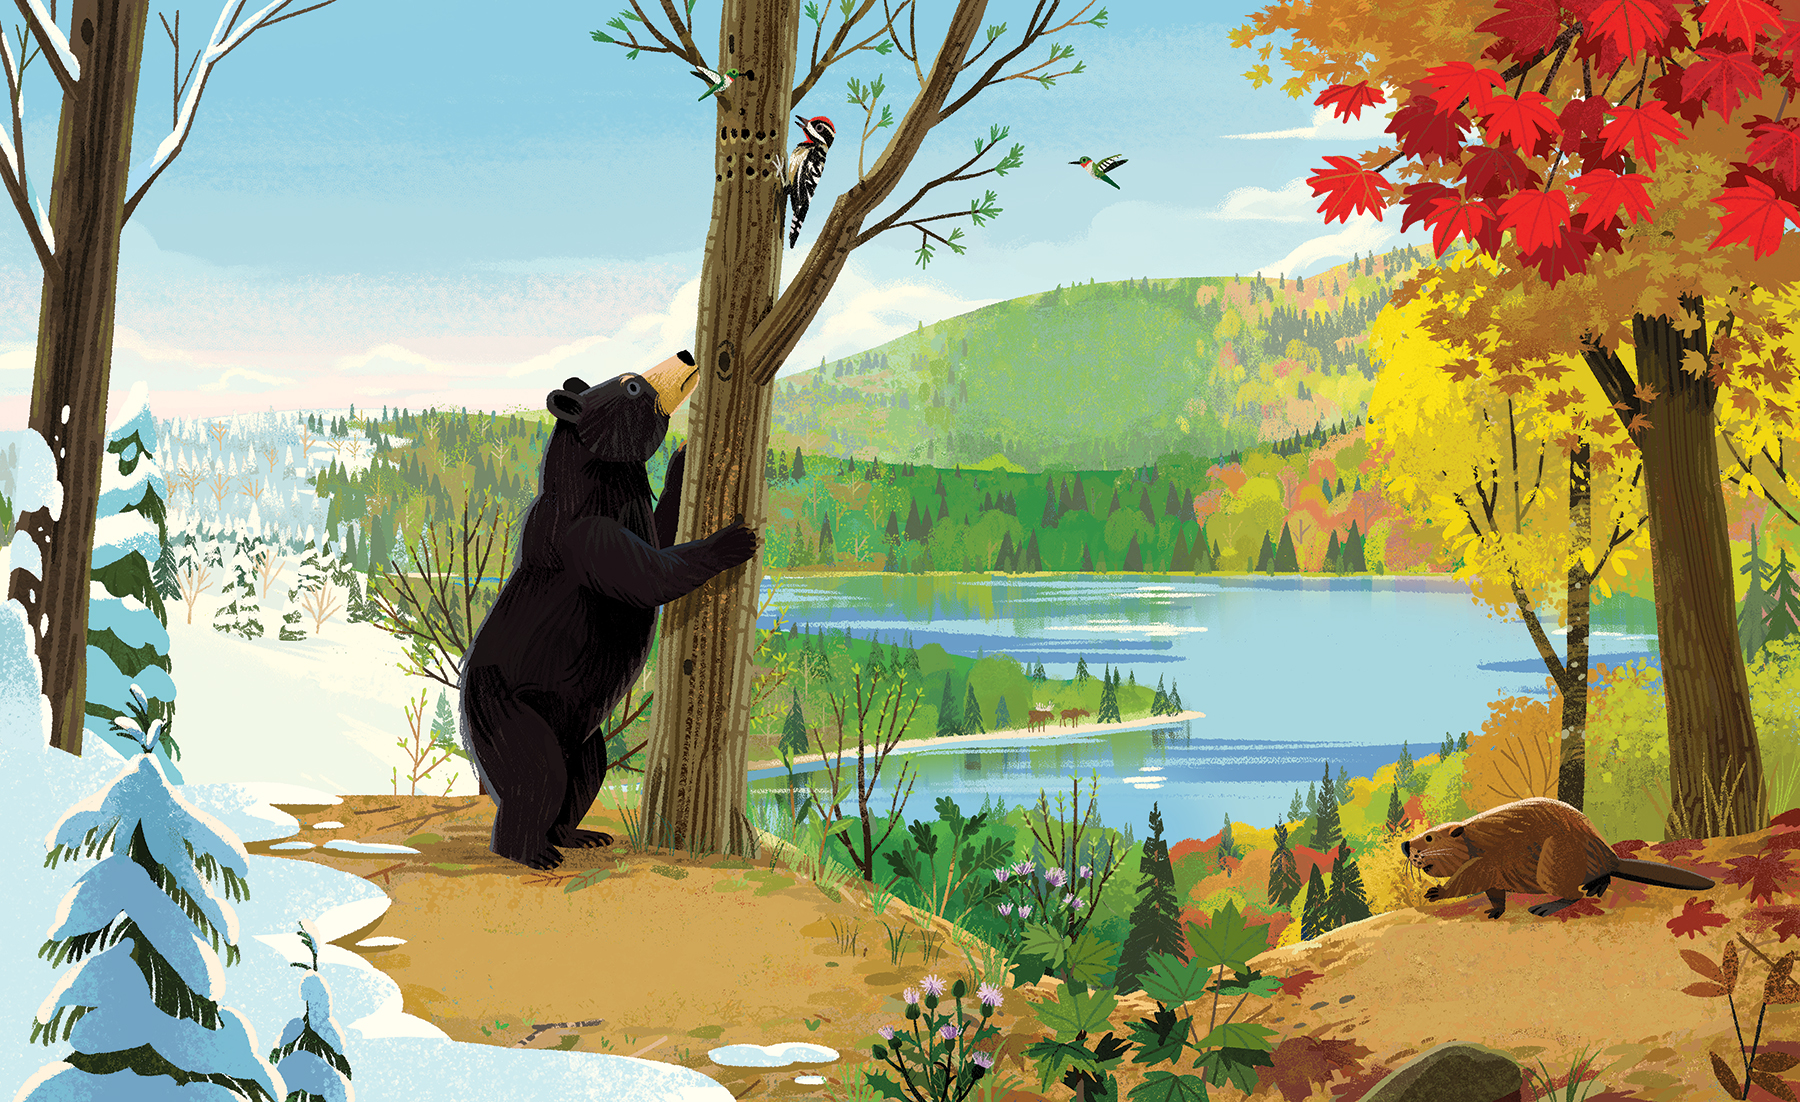 An illustration by Kim Smith from The Green Planet. It shows North America as the seasons change from winter to spring, and there is a black bear trying to get sap from a maple tree